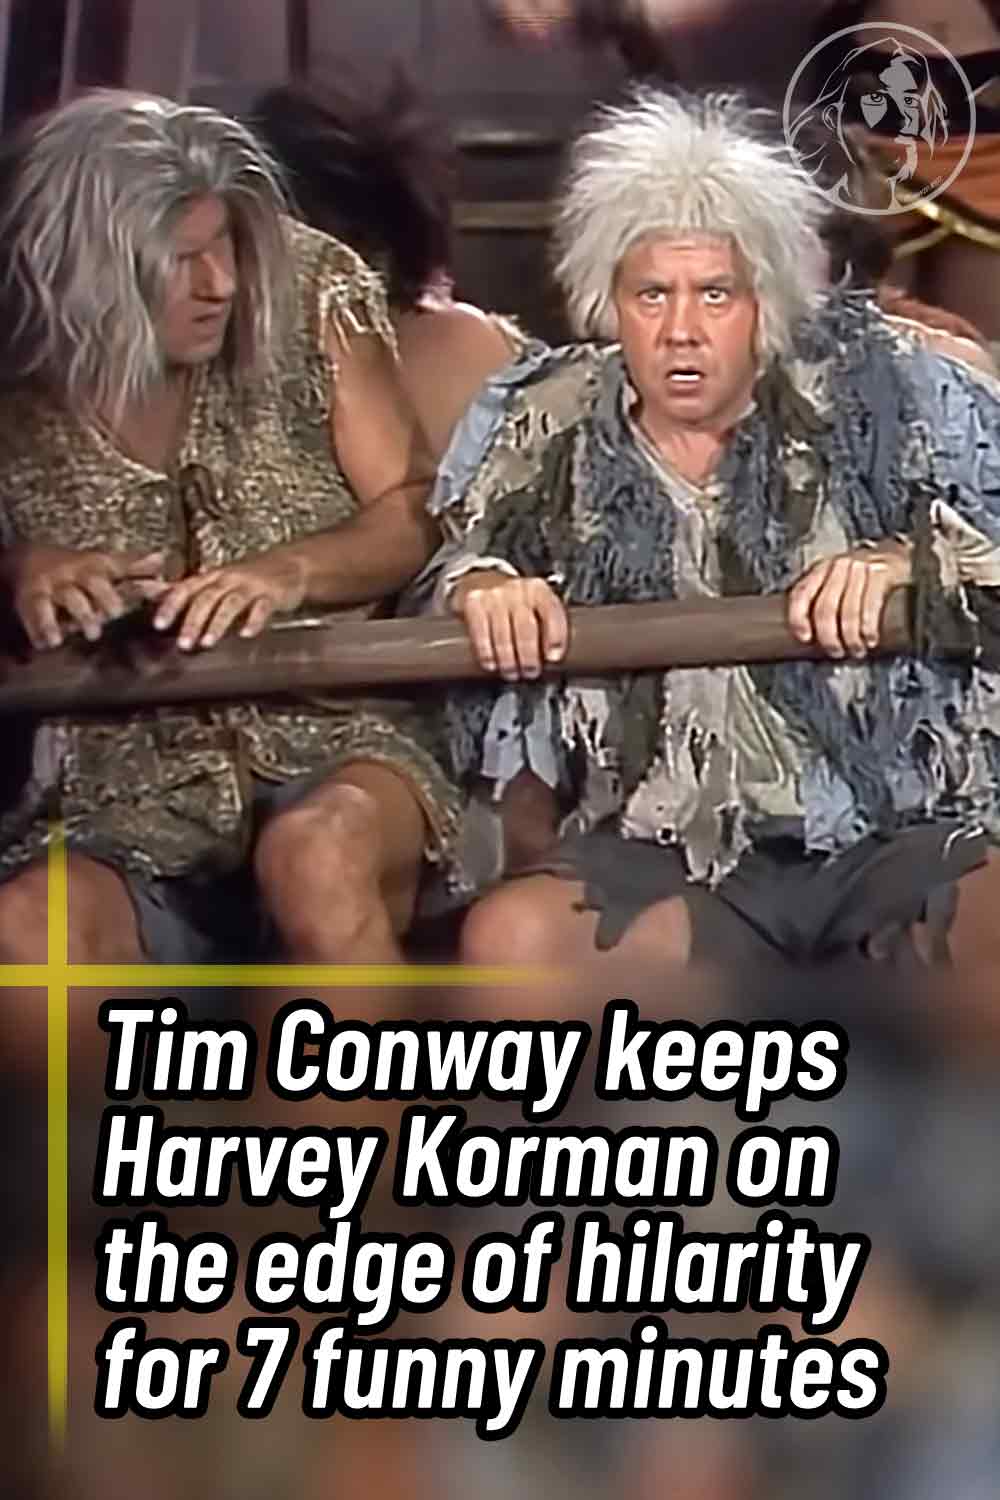 Tim Conway keeps Harvey Korman on the edge of hilarity for 7 funny minutes